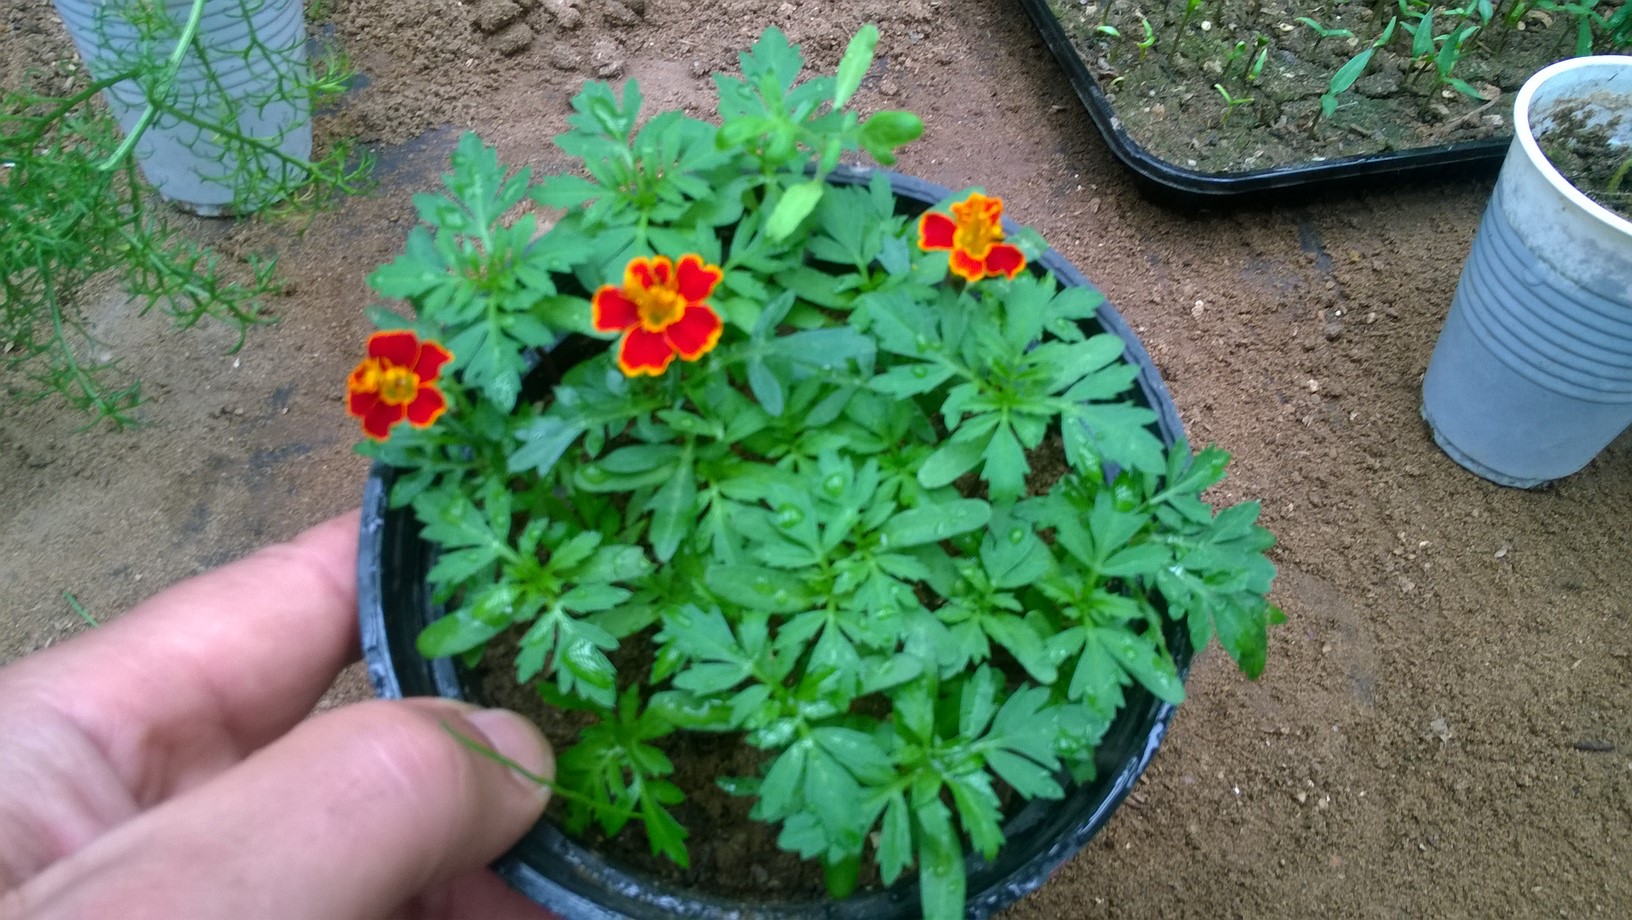 In order to be ready for planting outdoors in the spring, start growing marigolds from seed indoors about 50 to 60 days before the last frost date.